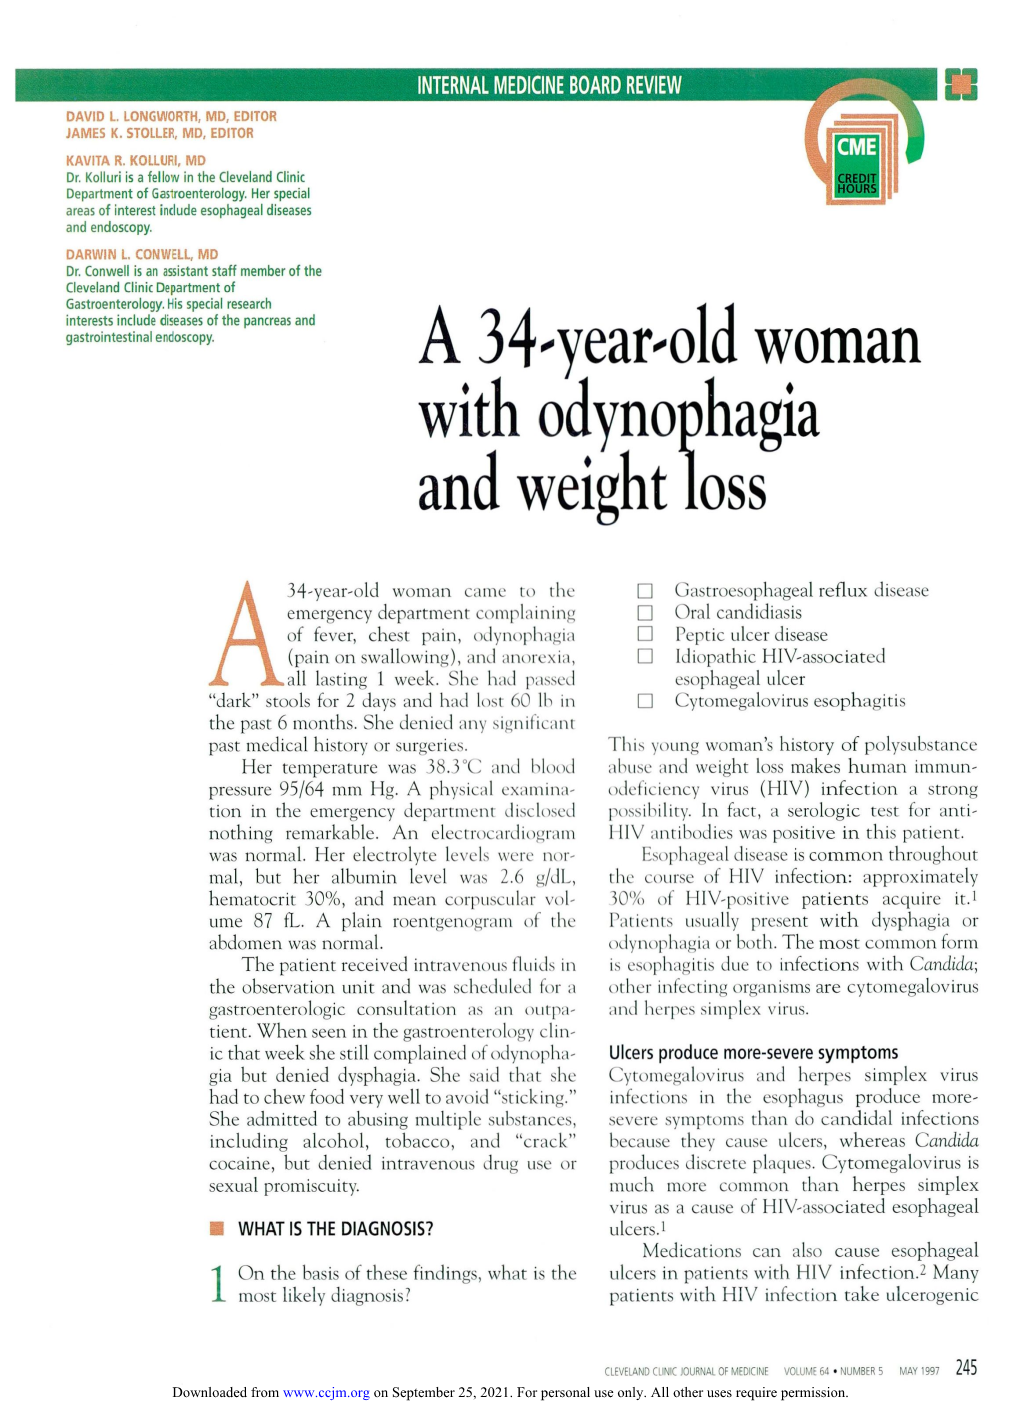 A 34-Year-Old Woman with Odynophagia and Weight Loss